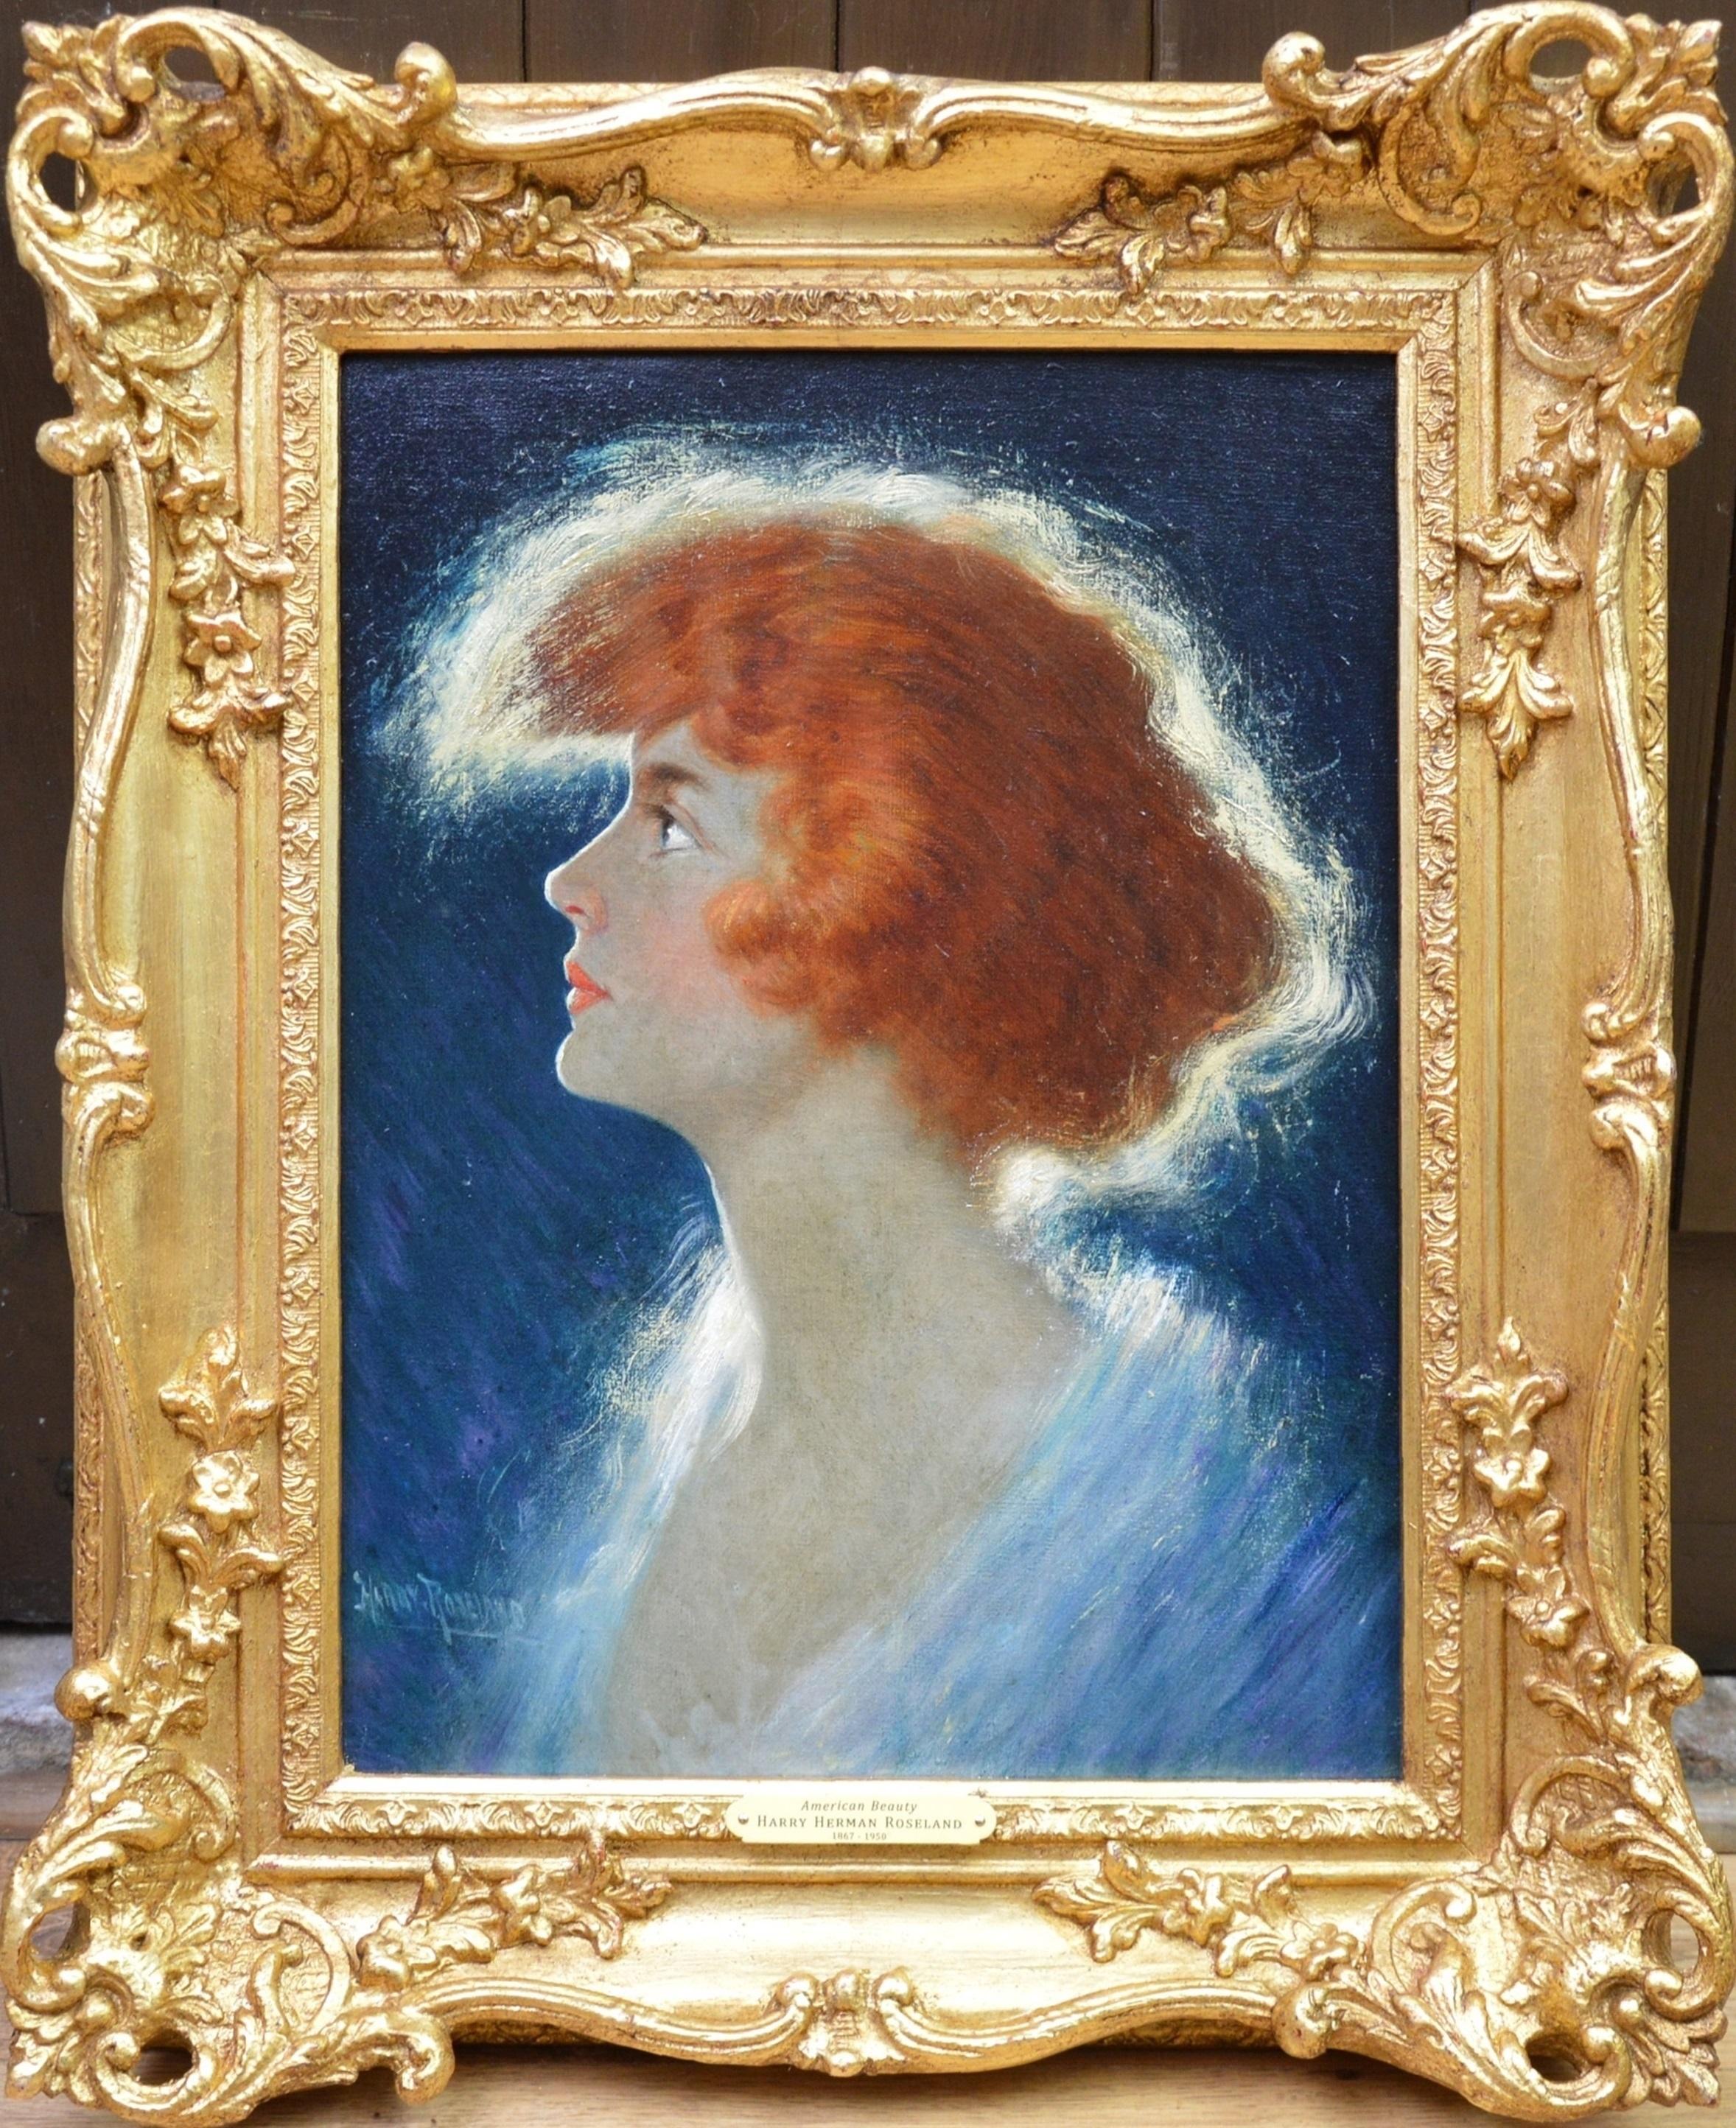 Harry Roseland Figurative Painting - American Beauty - Belle Epoque Oil Painting Portrait of Glamorous Redhead